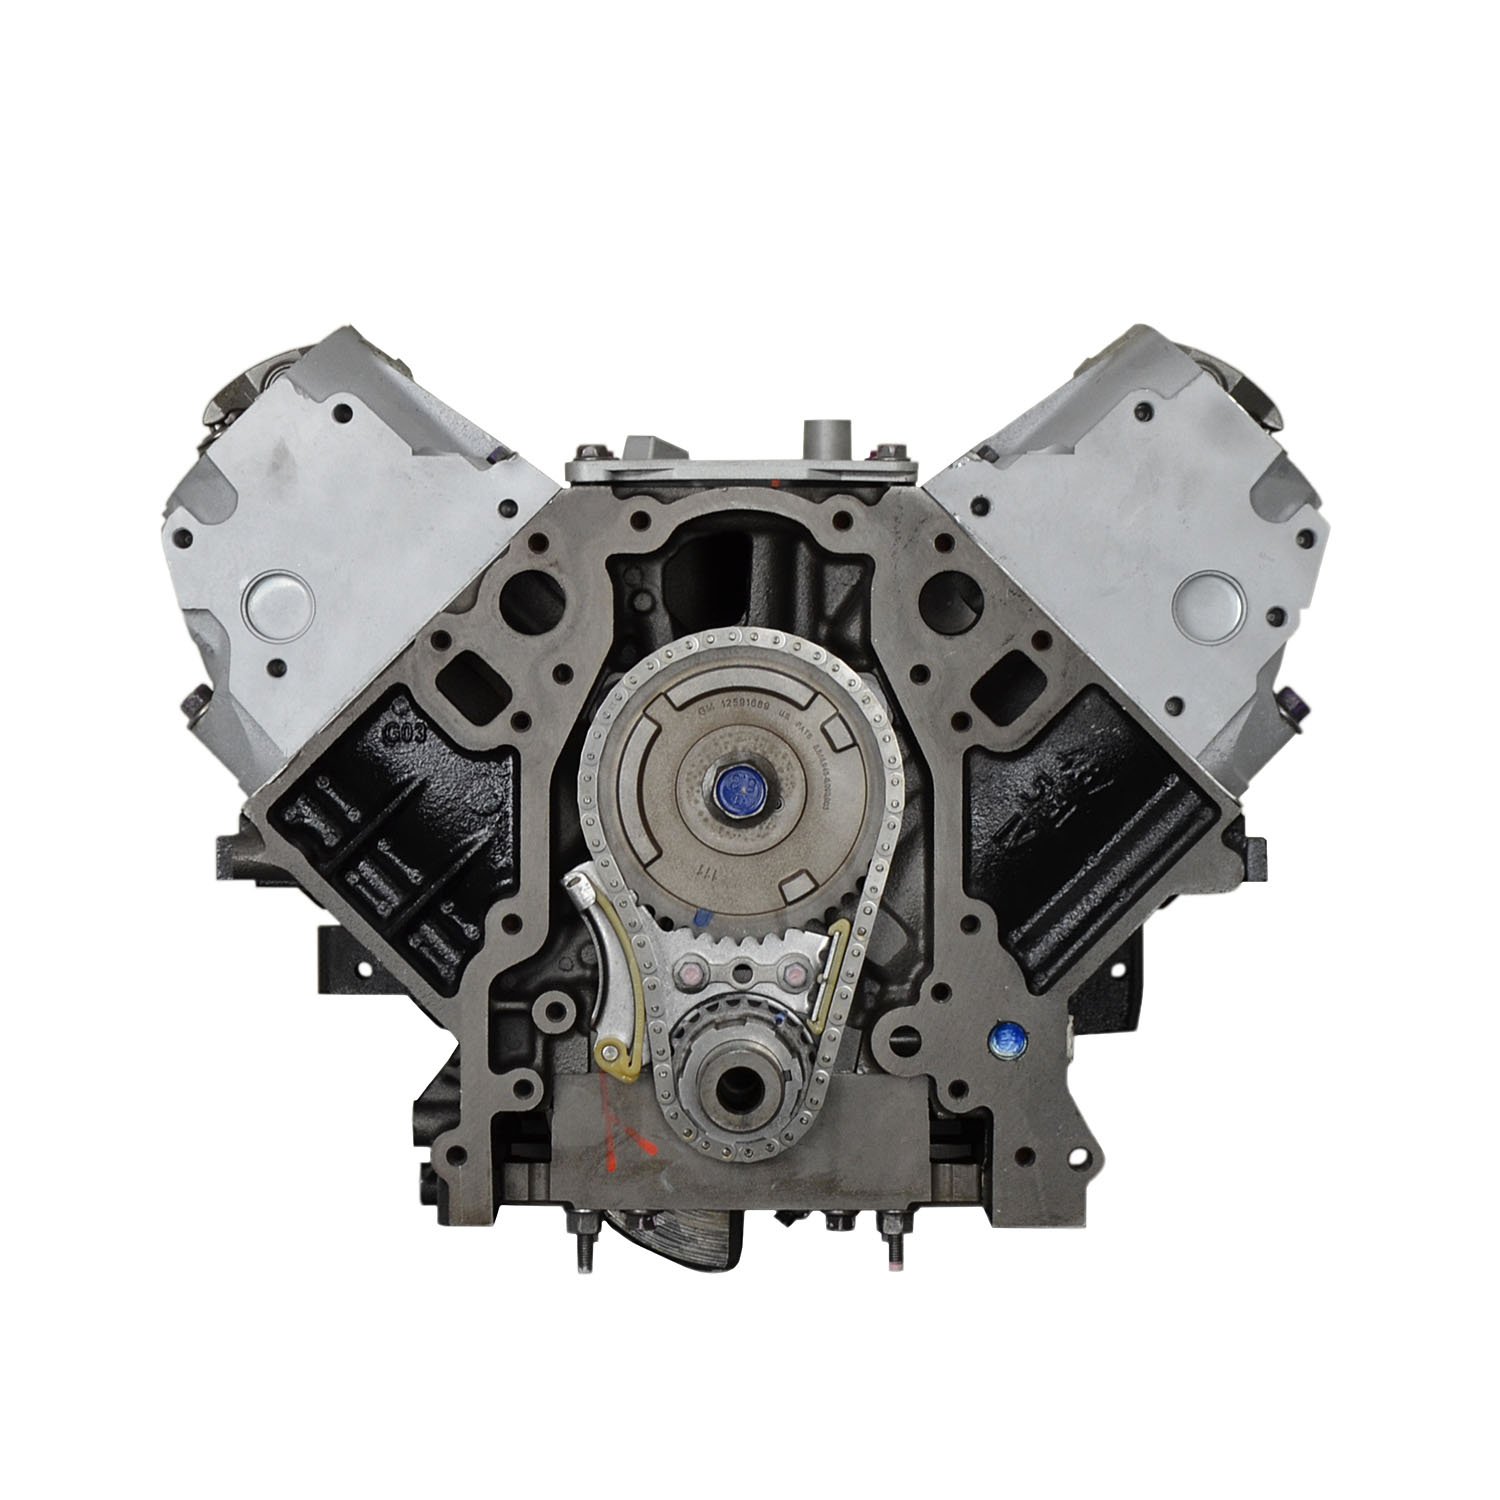 DCRC Remanufactured Crate Engine for 2007-2009 Chevy/GMC Truck, SUV & Van with 4.8L V8